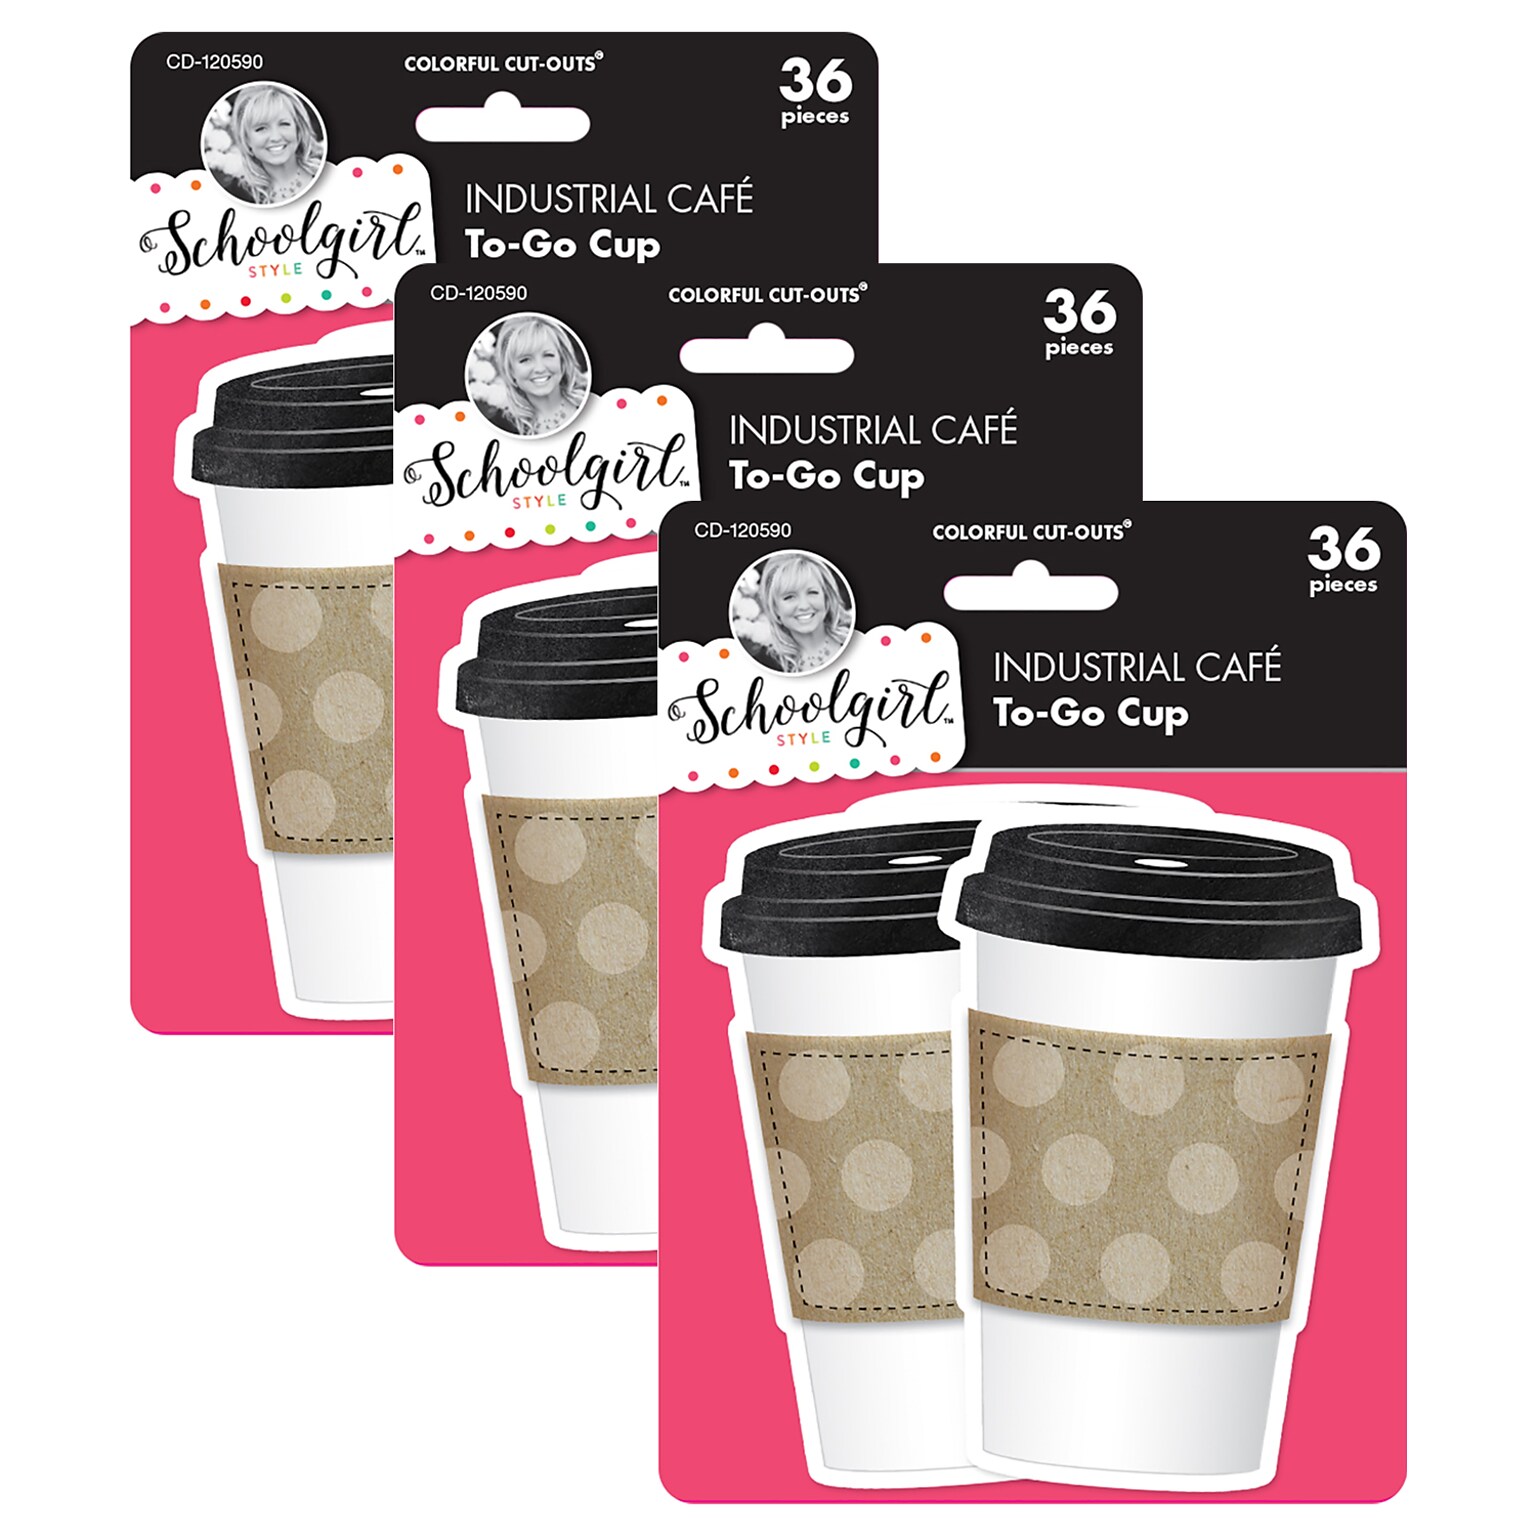 Schoolgirl Style™ Industrial Cafe To-Go Cup Cut-Outs, 36 Per Pack, 3 Packs (CD-120590-3)